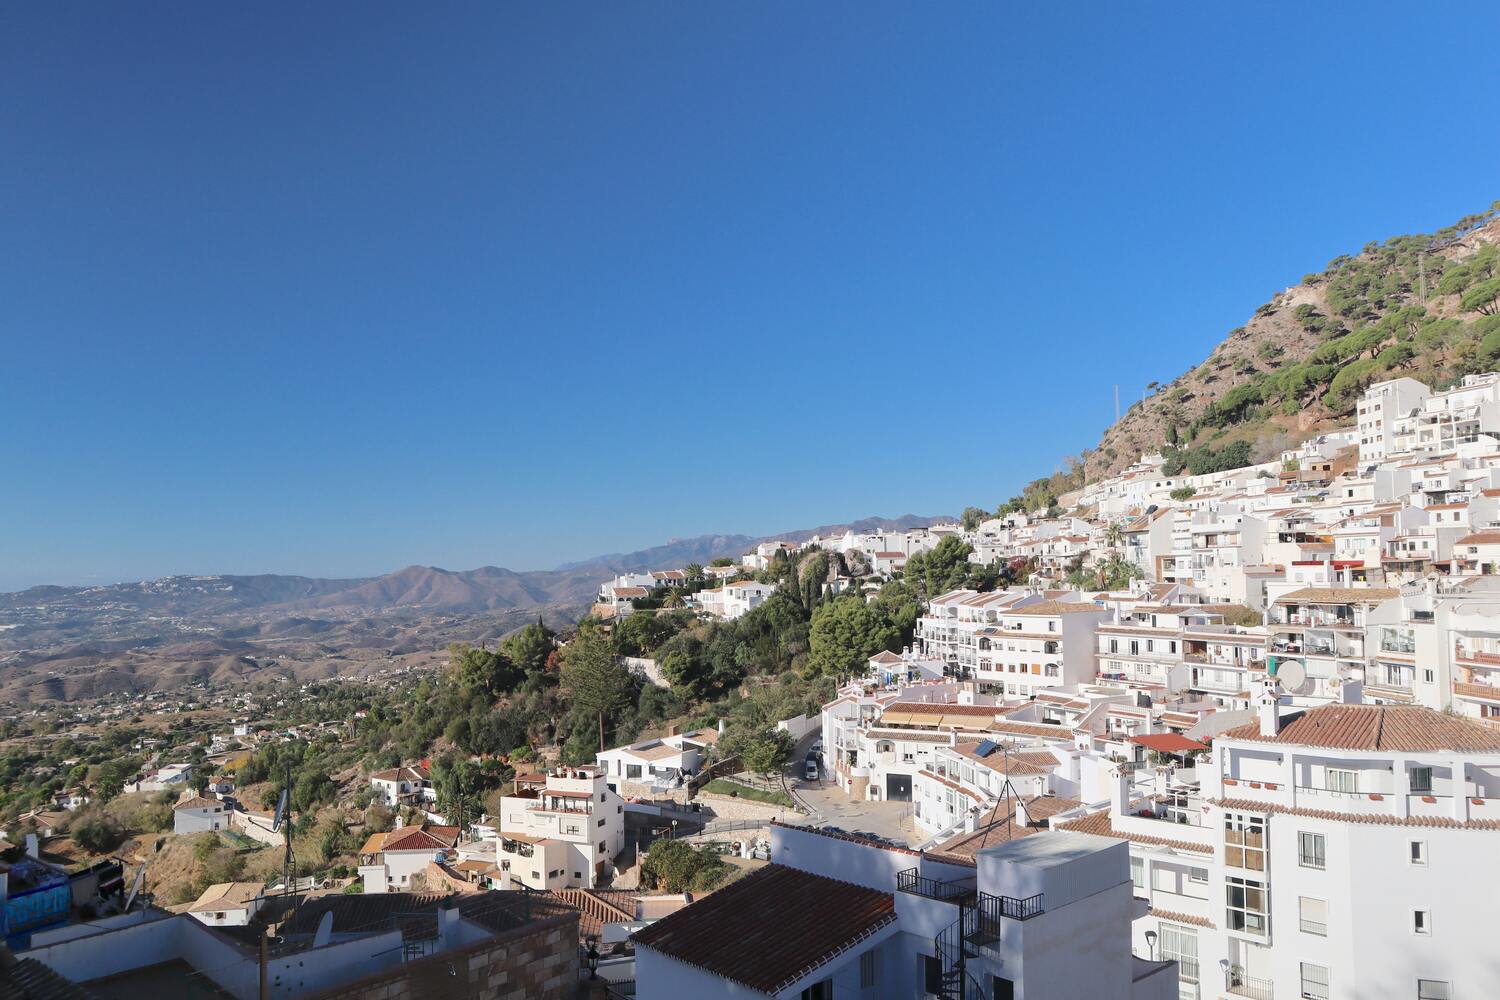 A panoramic view of a hillside town with white buildings and terracotta roofs under a clear blue sky